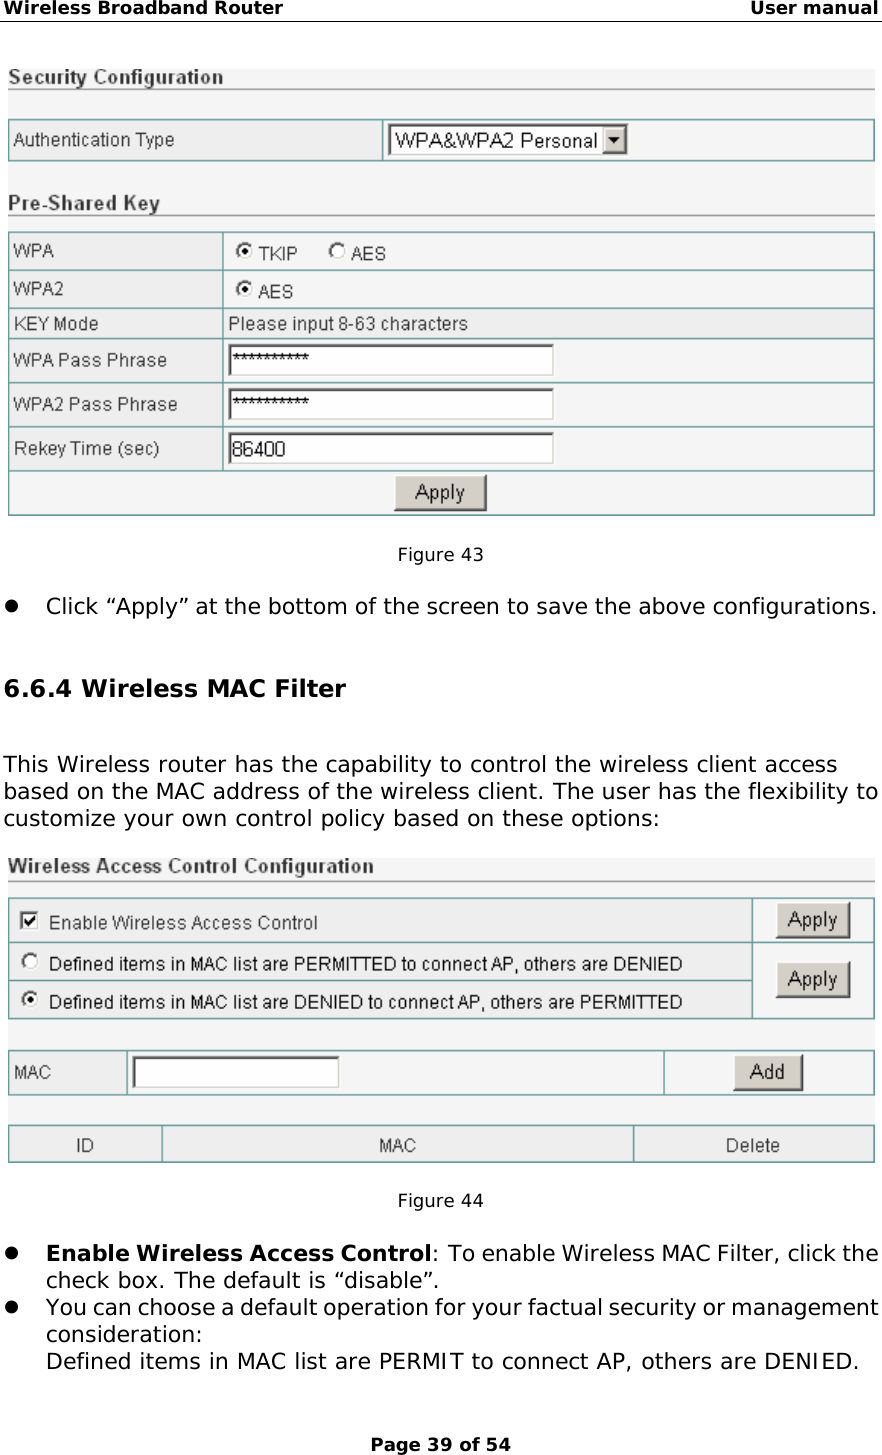 Wireless Broadband Router                                                   User manual Page 39 of 54   Figure 43  z Click “Apply” at the bottom of the screen to save the above configurations.  6.6.4 Wireless MAC Filter This Wireless router has the capability to control the wireless client access based on the MAC address of the wireless client. The user has the flexibility to customize your own control policy based on these options:    Figure 44  z Enable Wireless Access Control: To enable Wireless MAC Filter, click the check box. The default is “disable”. z You can choose a default operation for your factual security or management consideration: Defined items in MAC list are PERMIT to connect AP, others are DENIED. 